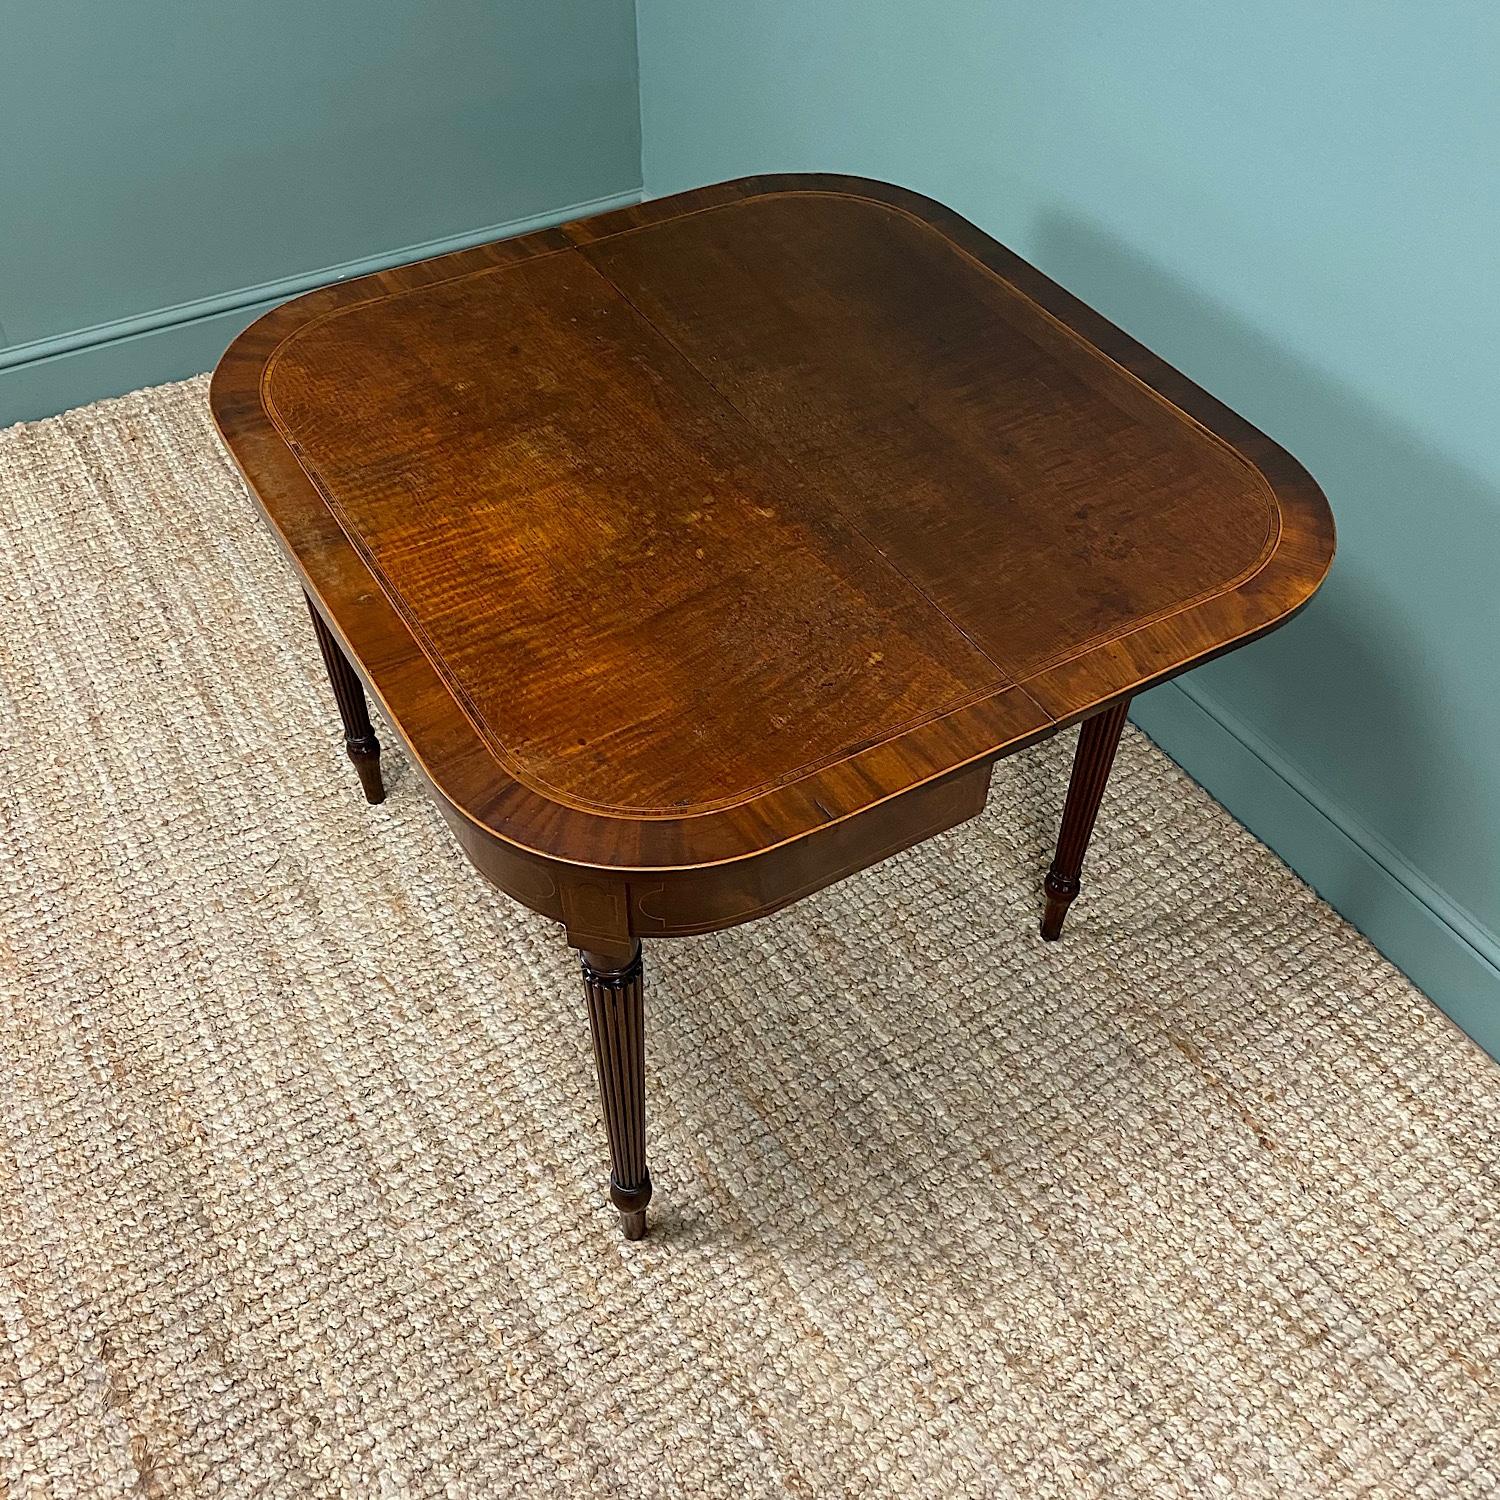 Regency Country House 19th century Georgian Antique Side Table / Tea Table For Sale